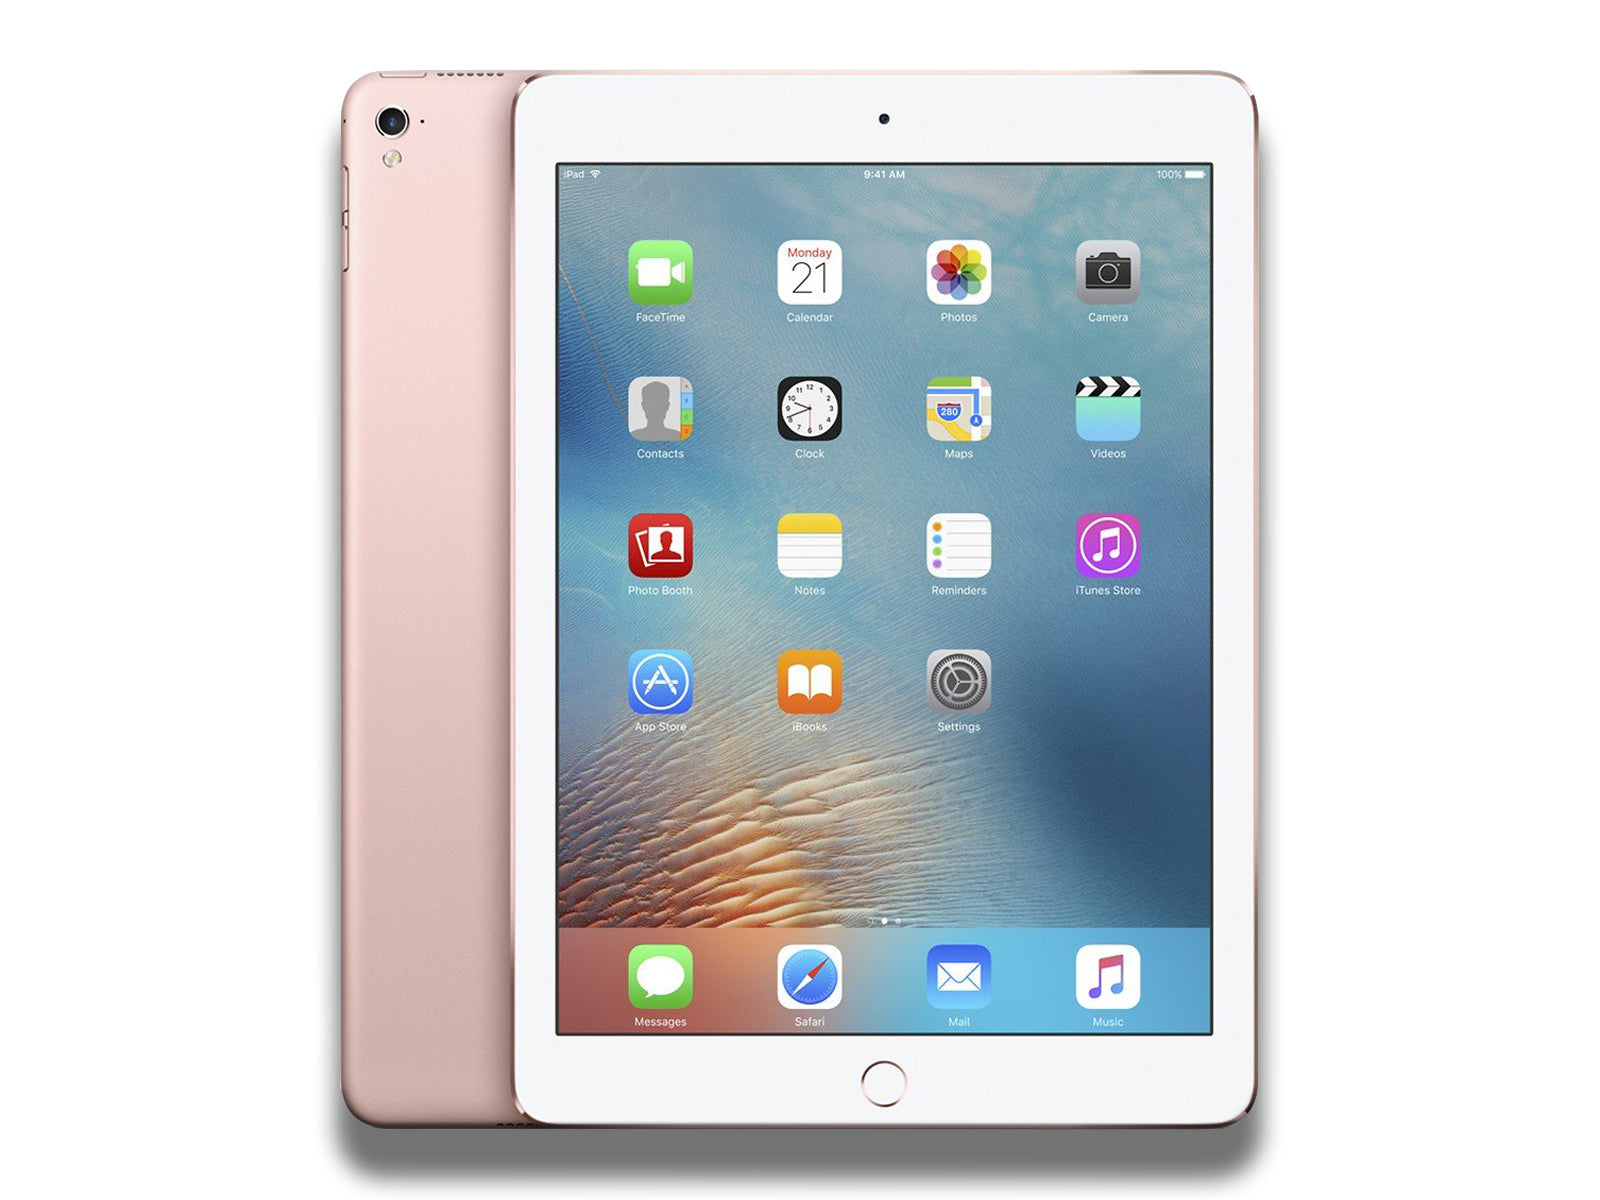 Image shows the rosegold Apple iPad Pro 9.7-inch